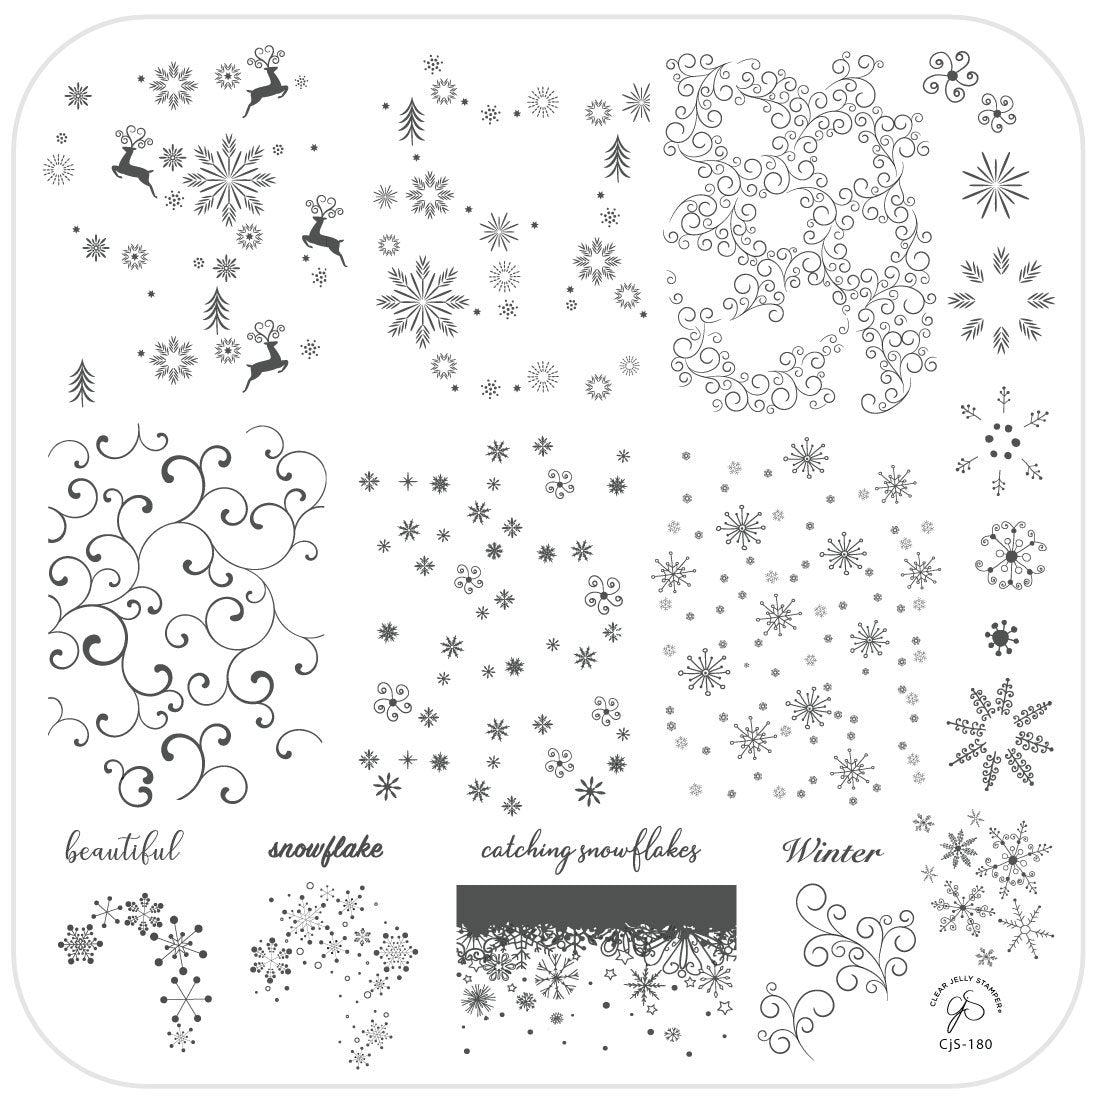 Clear Jelly Stamper- CjS-180- Catching Snowflakes